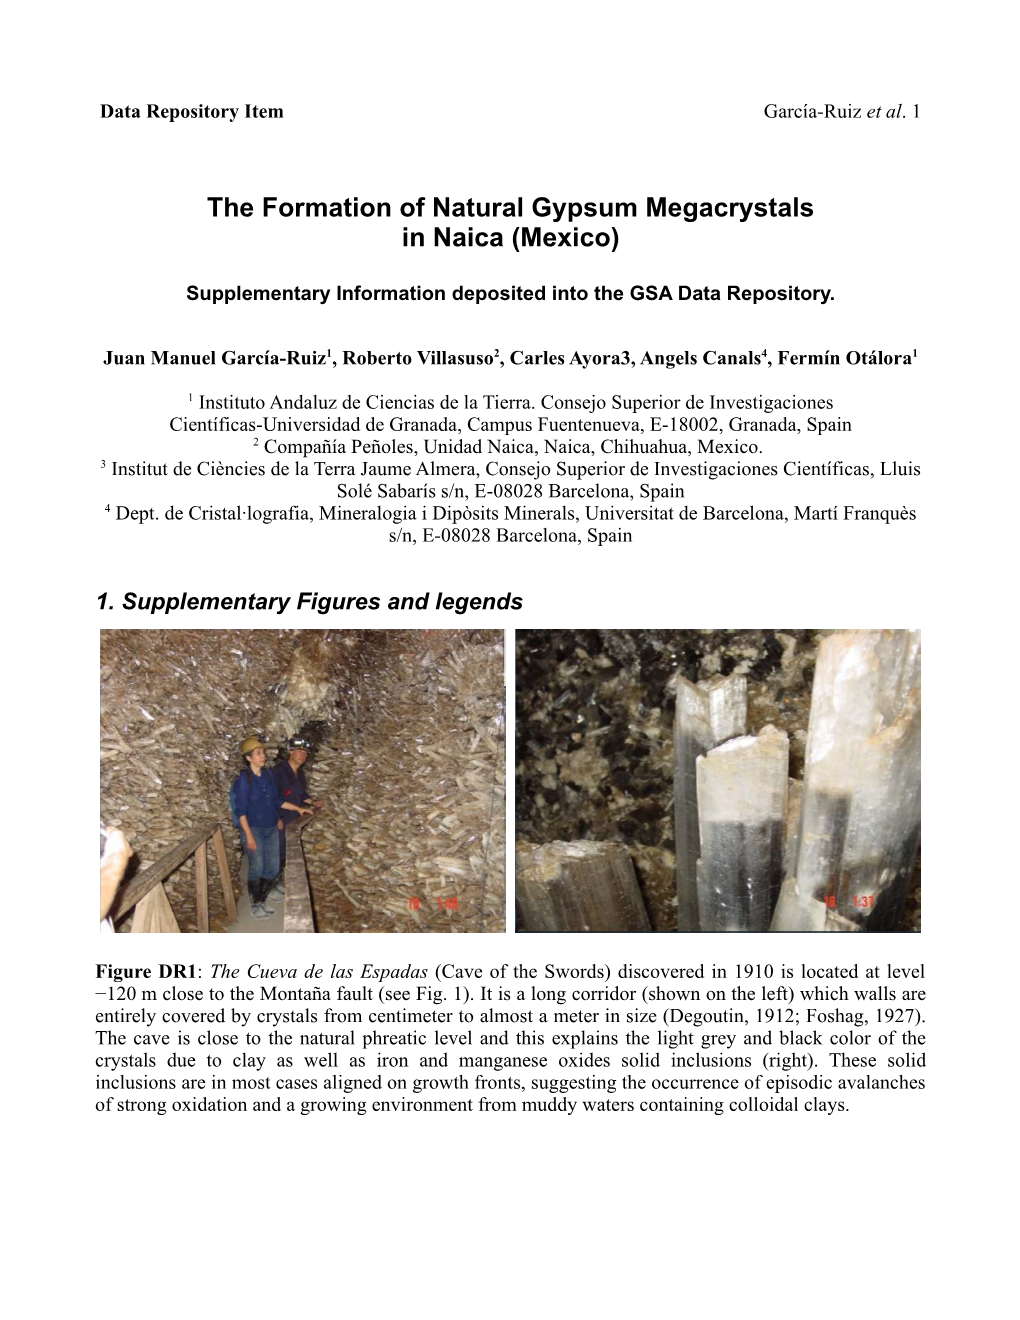 The Formation of Natural Gypsum Megacrystals in Naica (Mexico)